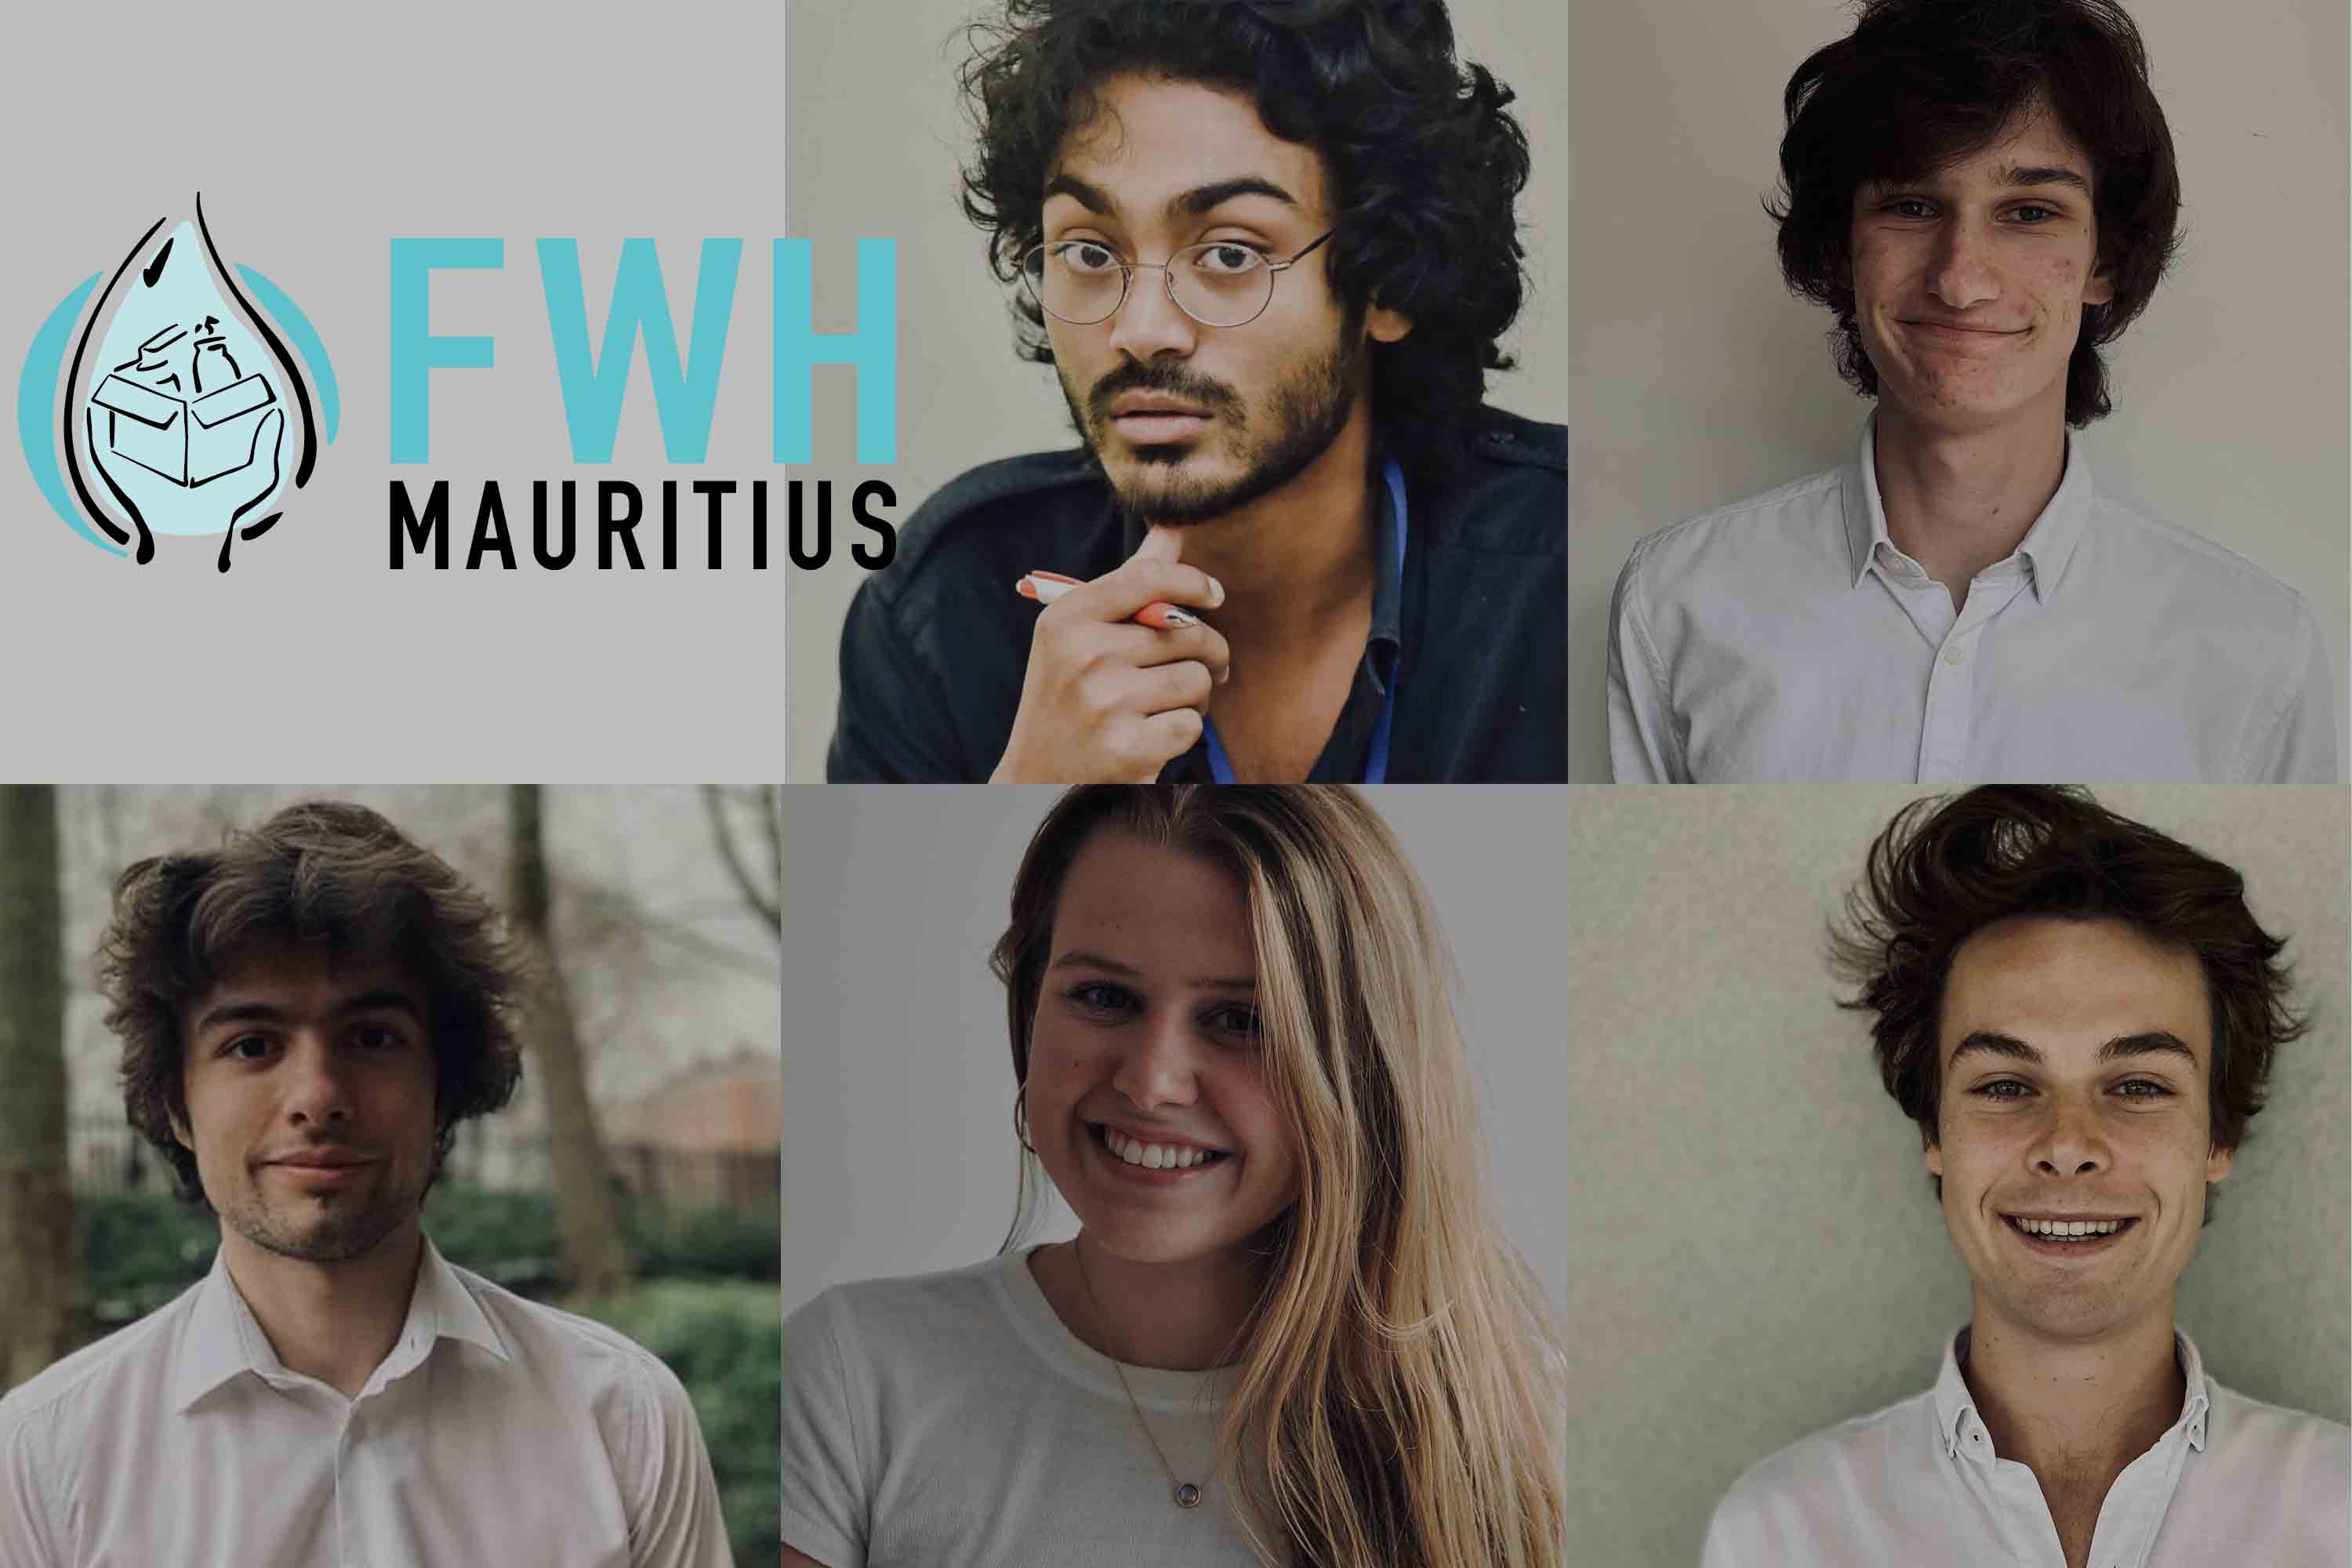 Meet the five co-founders of FWH